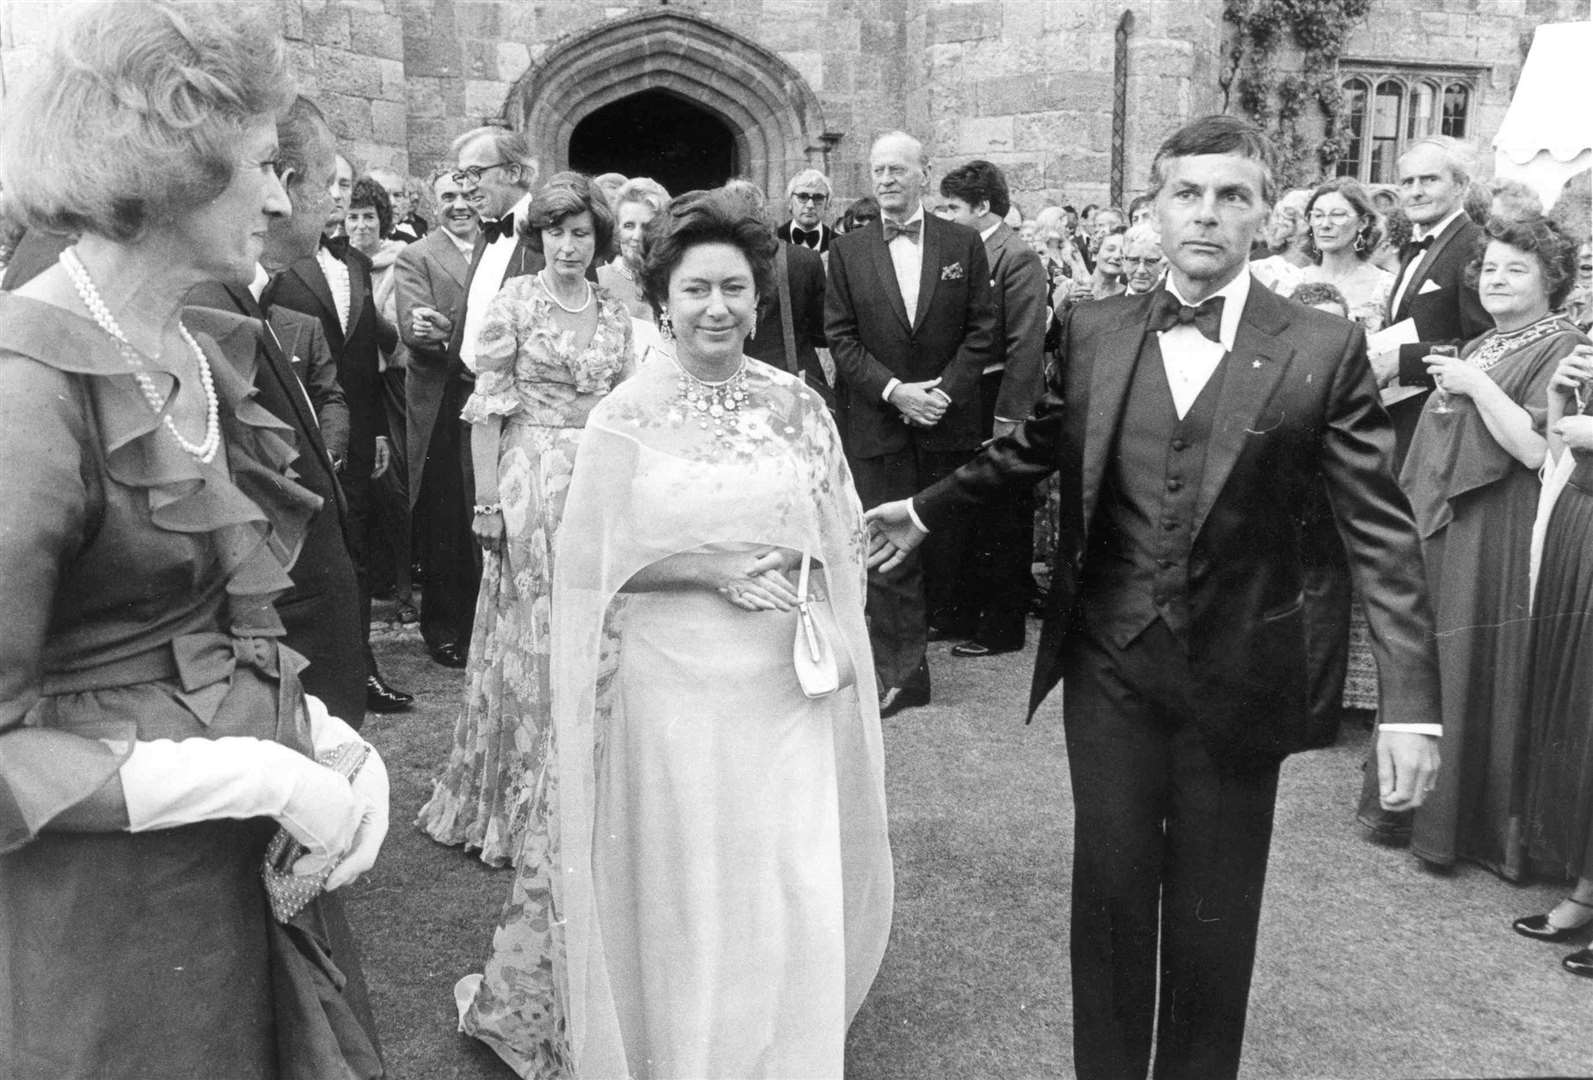 In June 1979, Princess Margaret was guest of honour at a fashion show at Leeds Castle in aid of one of her favourite charities, The Dockland Settlement Trust